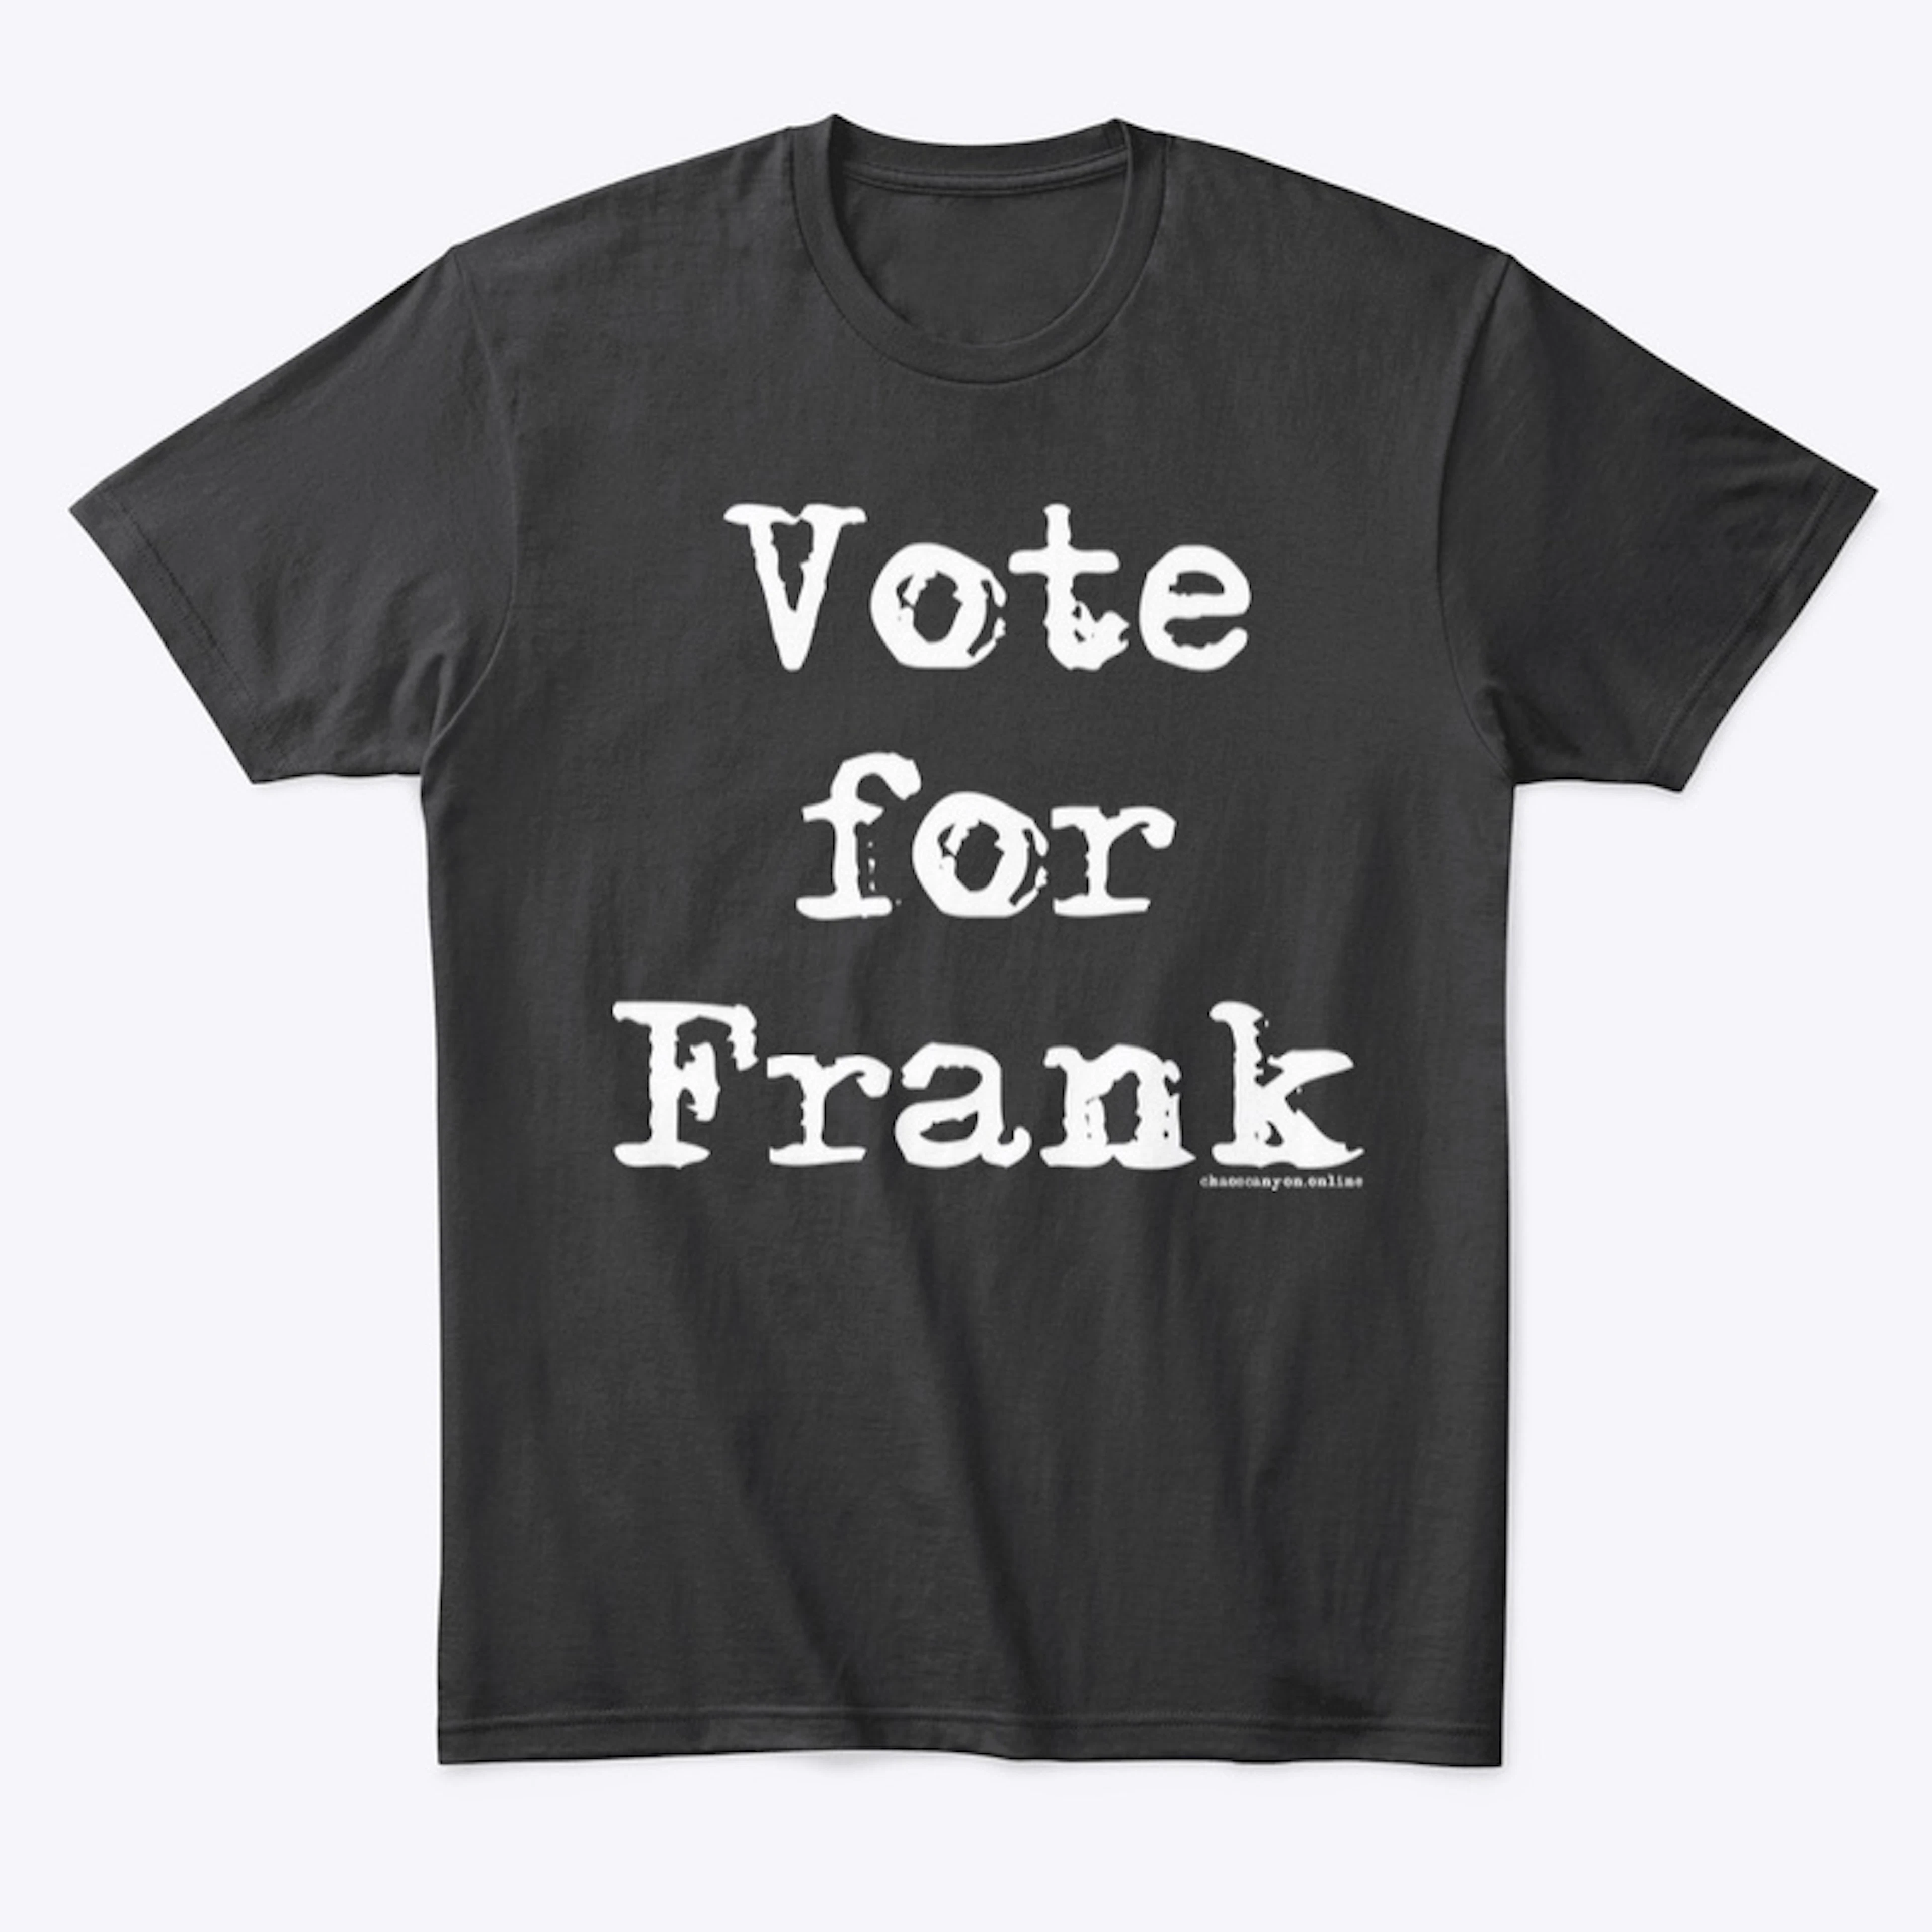 Vote for Frank